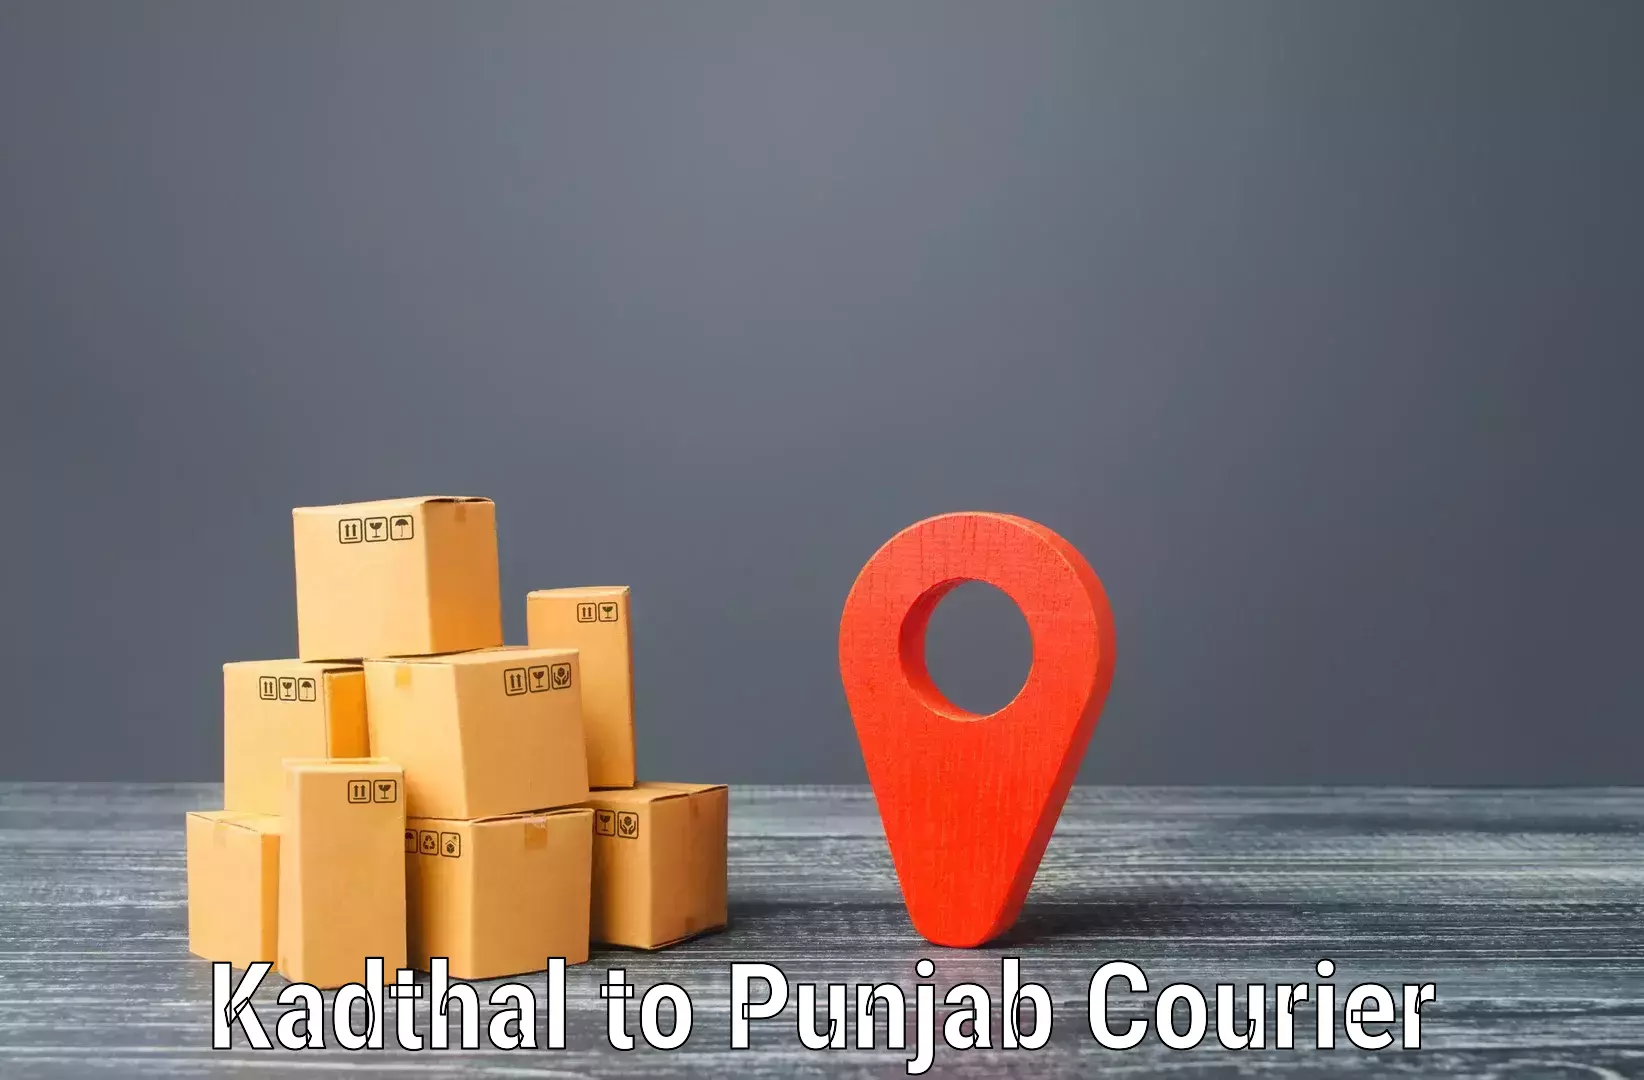 Nationwide delivery network Kadthal to Punjab